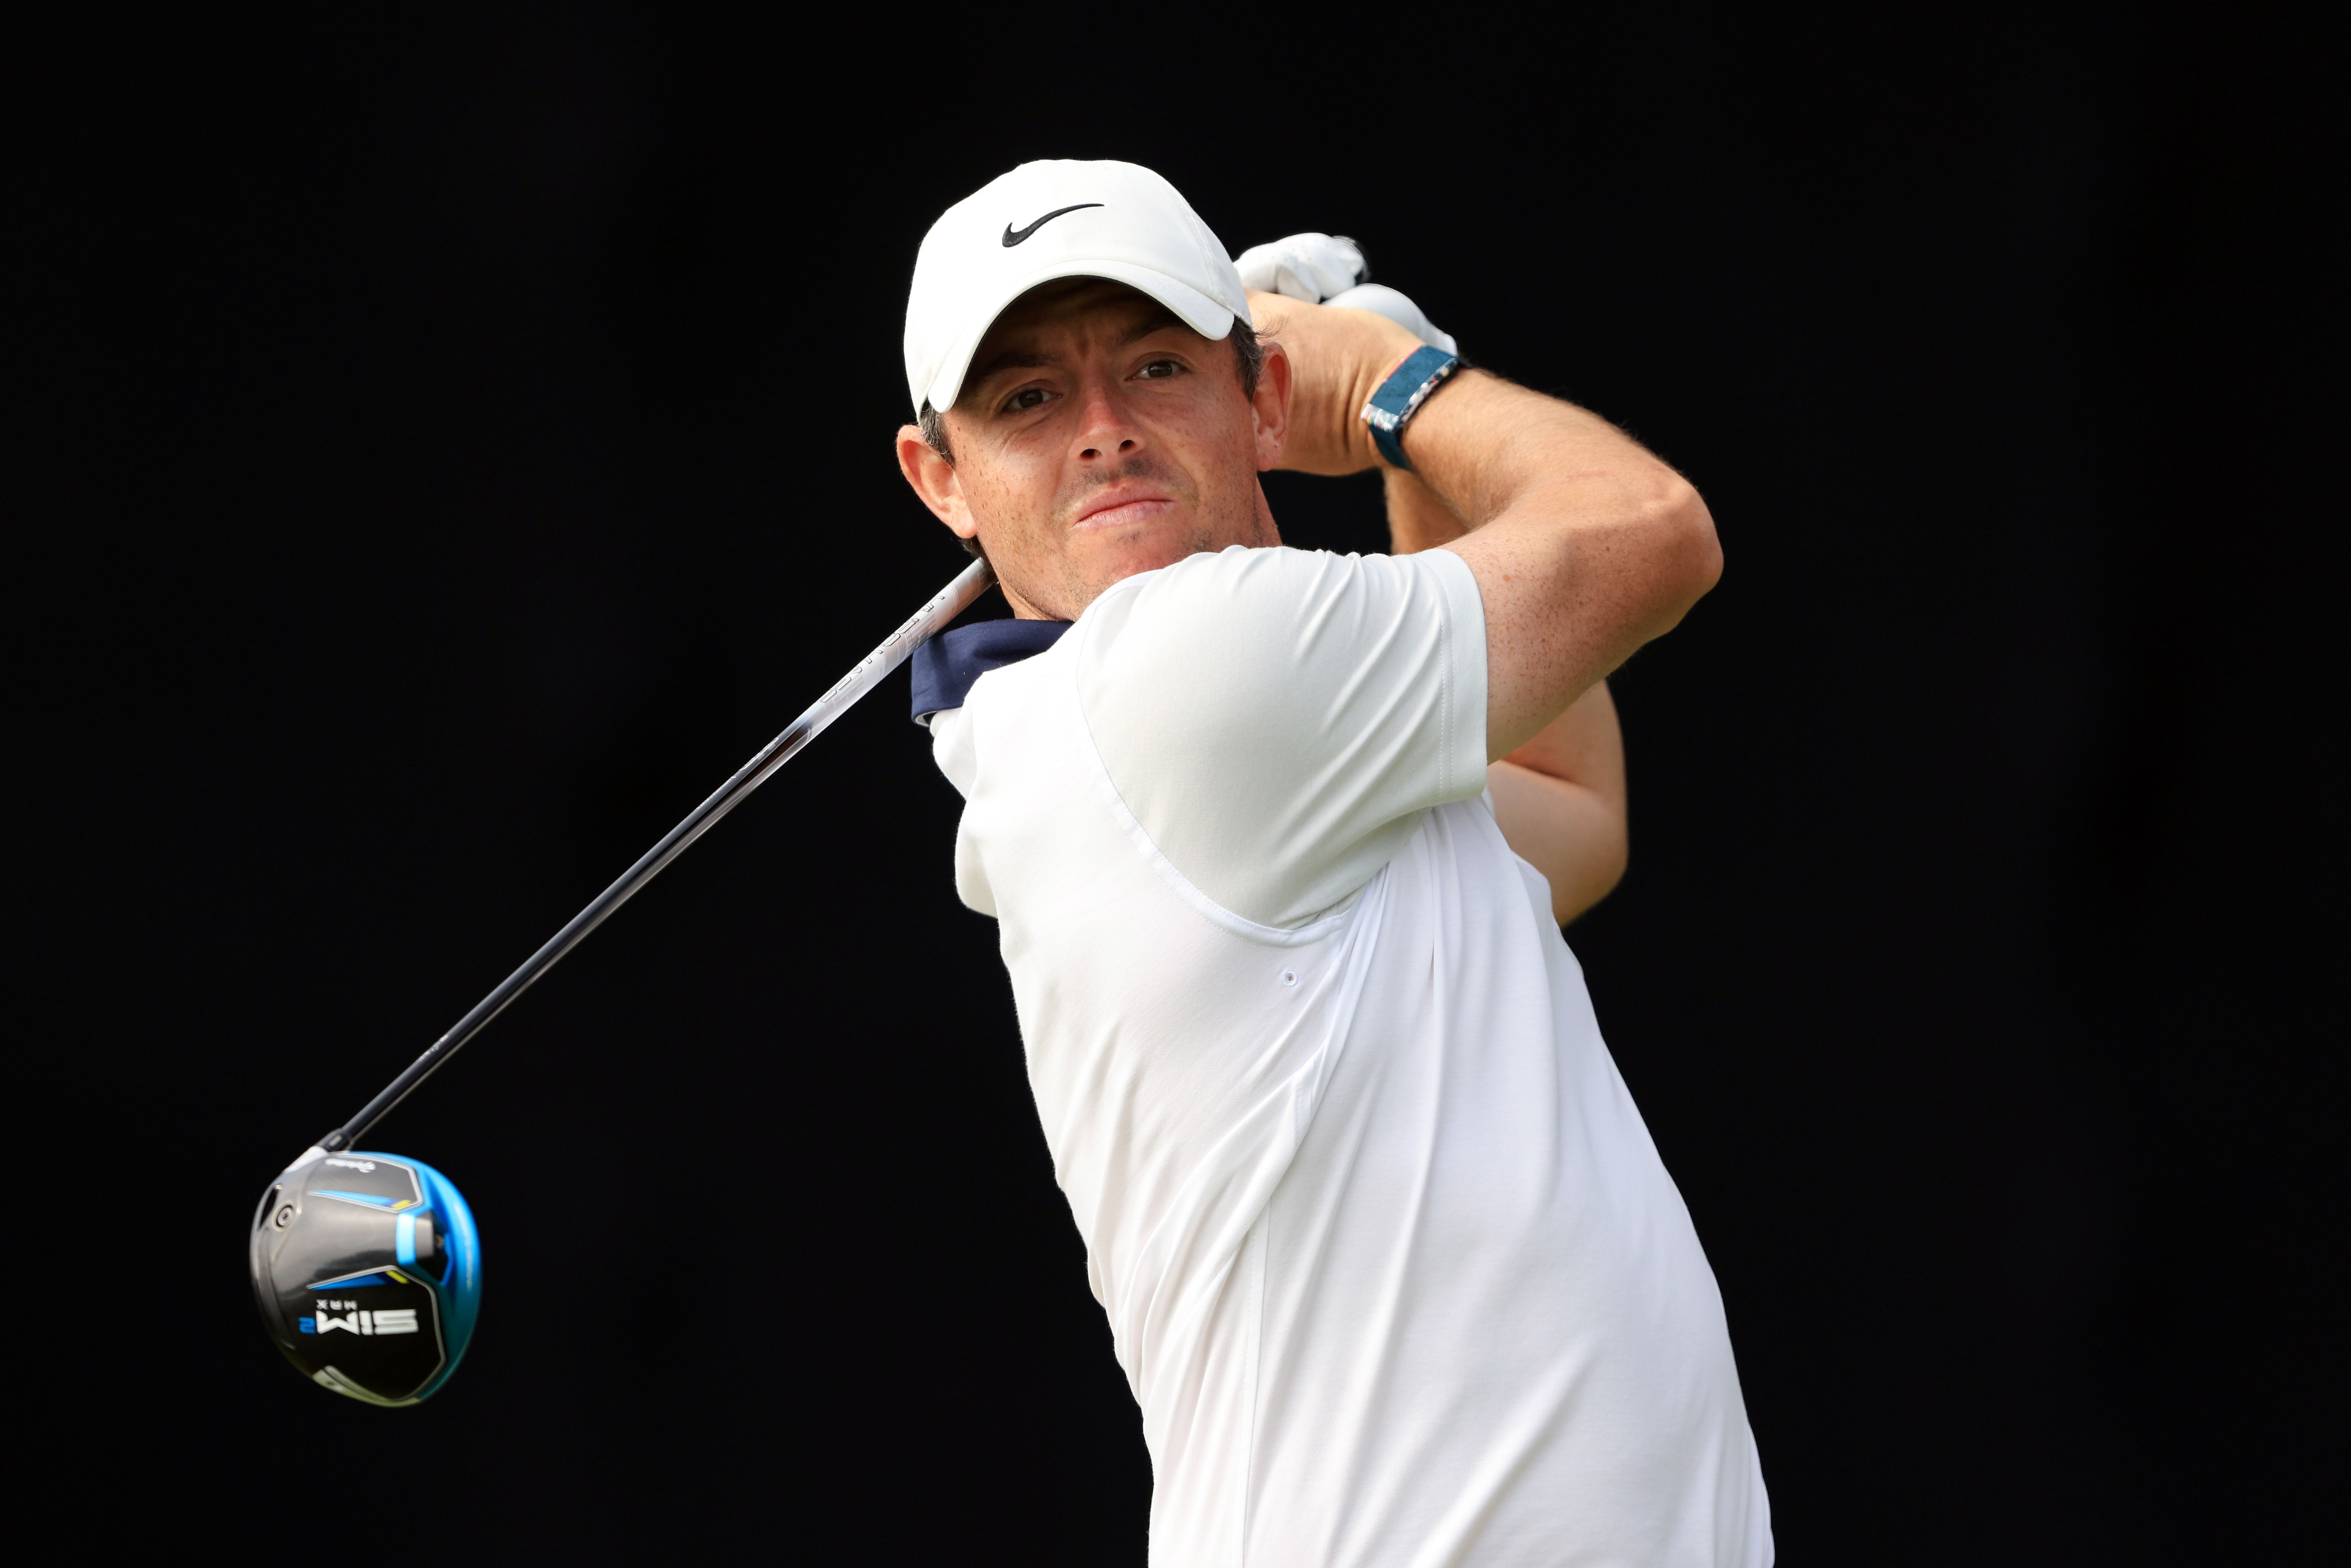 U.S. Open 2021 live updates: Rory McIlroy, Jon Rahm finish in dark, Louis Oosthuizen, Russell Henley lead after Day 1. Golf News and Tour Information